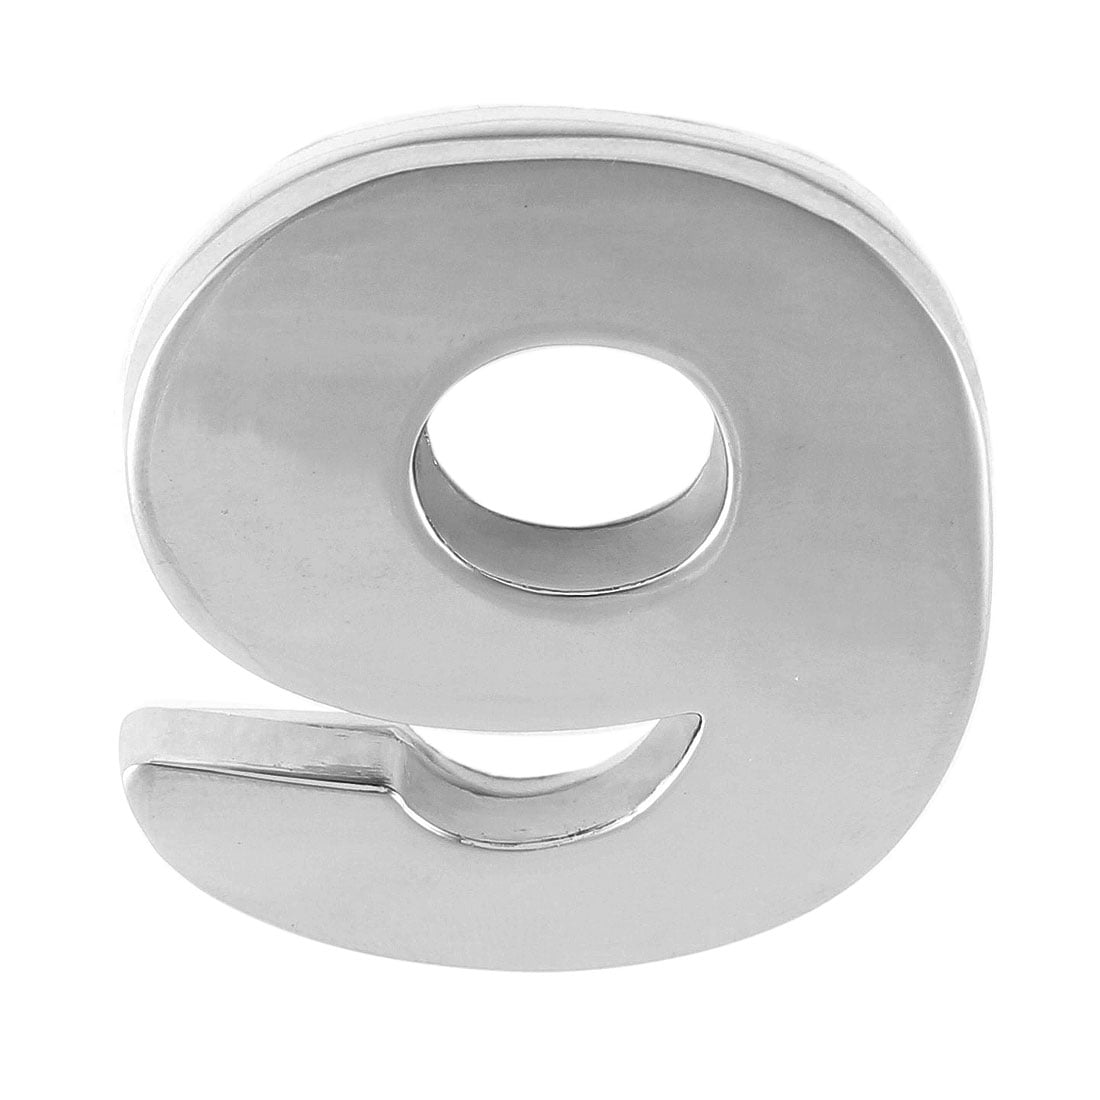 Self Adhesive Number 9 Shaped Car Sticker Decals Badges Emblem Silver Tone